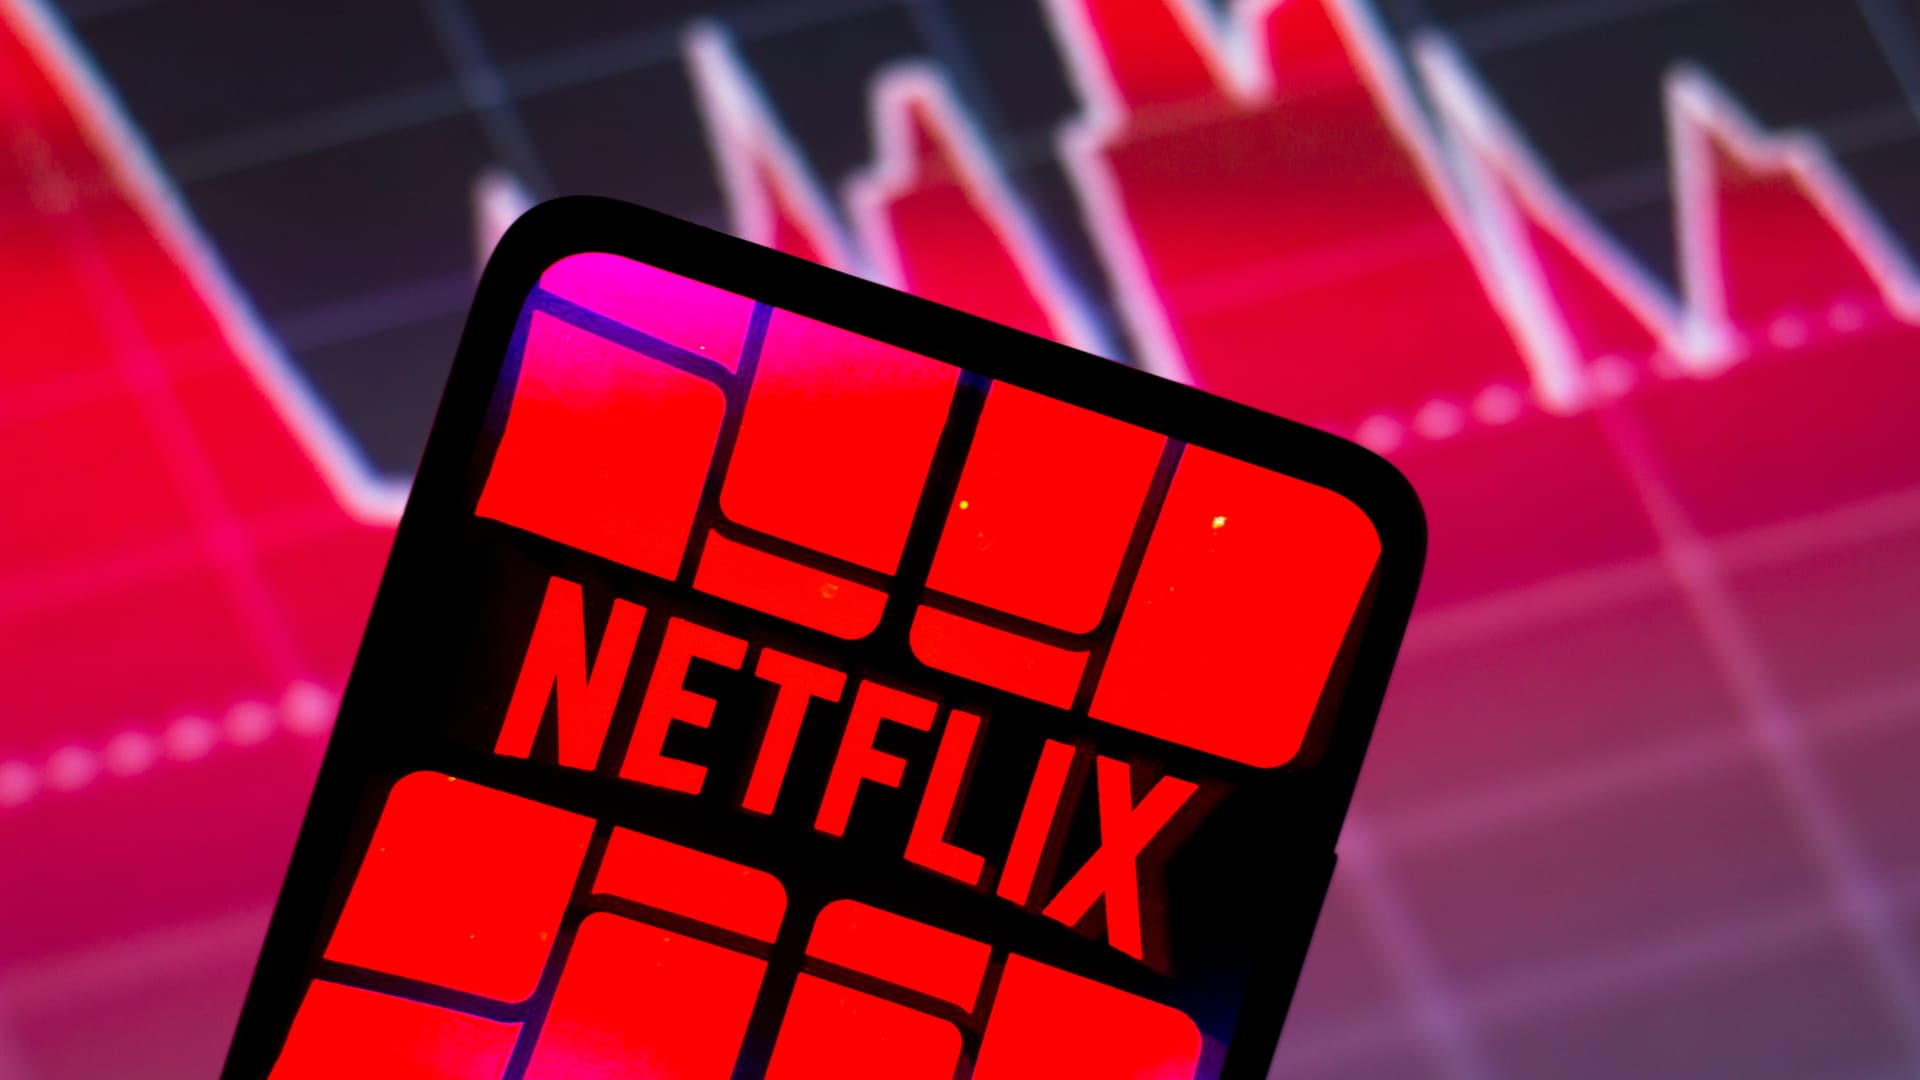 Stocks making the biggest moves midday: Netflix, Cal-Maine Foods, Southwest and more